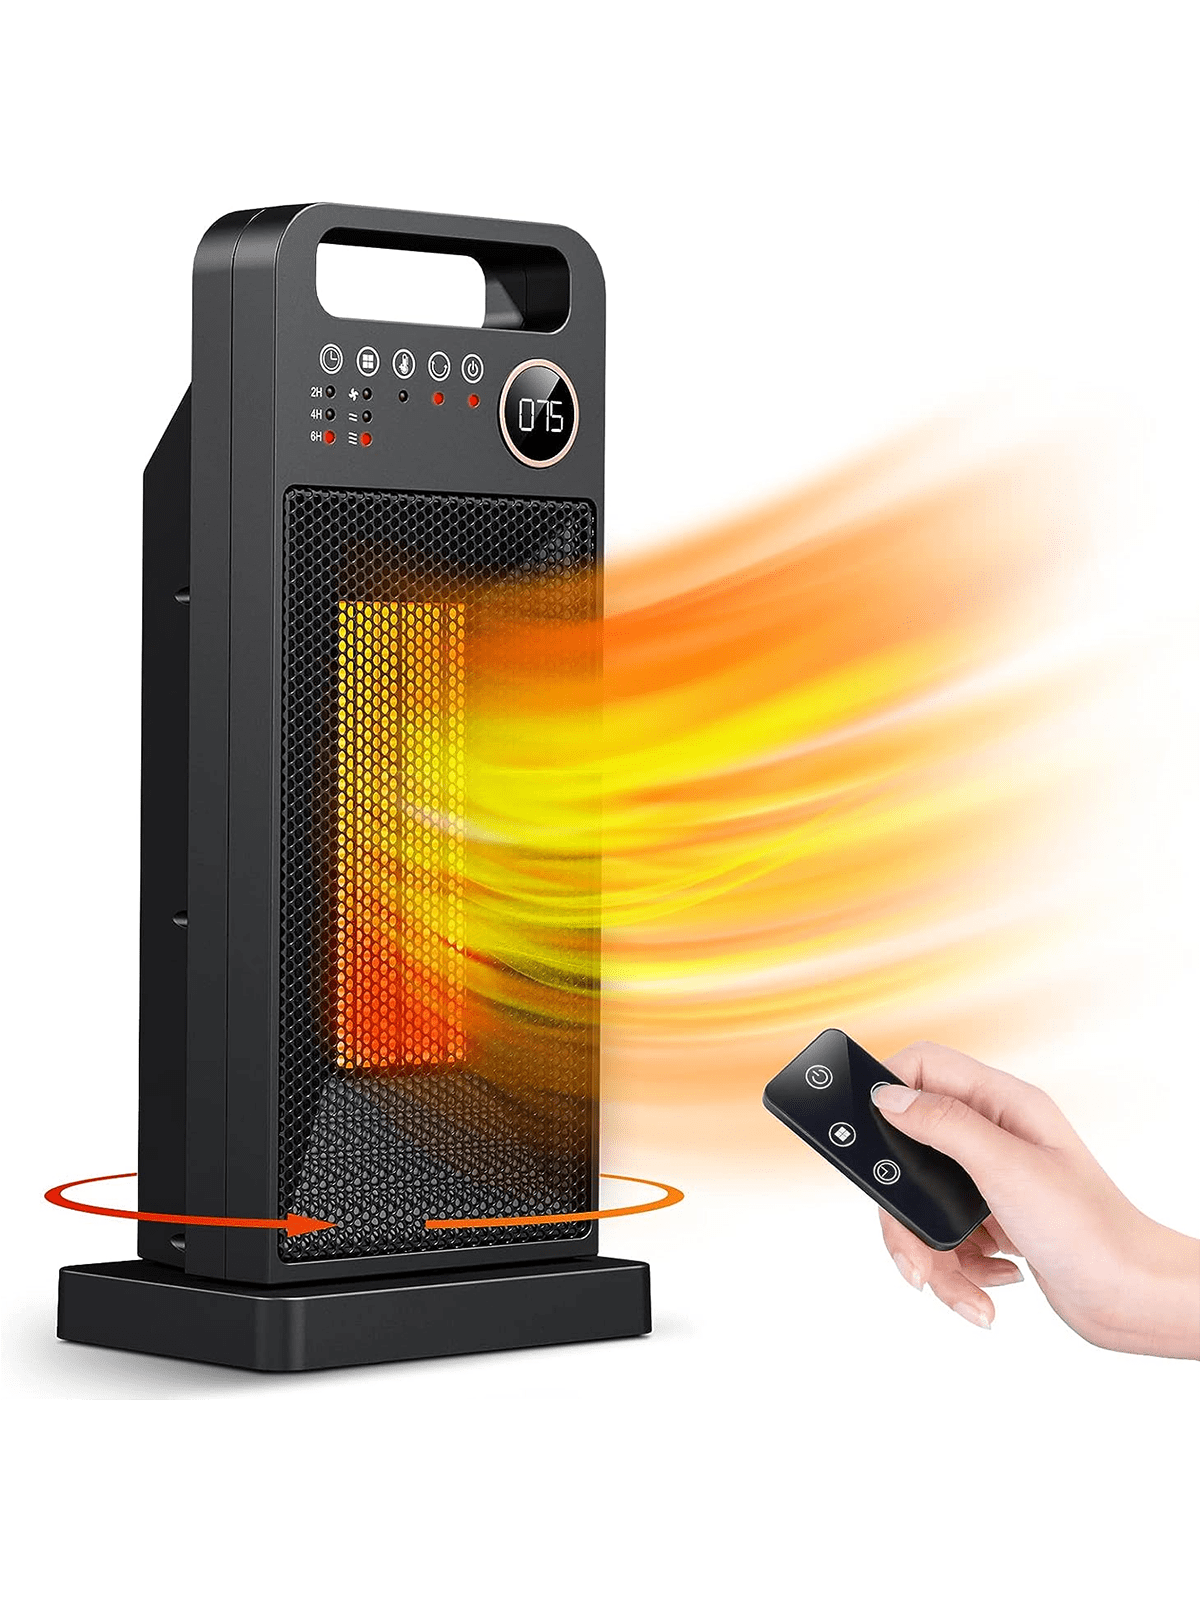 1500W Electric Heater Space Heater for Indoor Use with Remote Control Digital Display Touch Button Oscillation  Portable Thermostat Overheat Protection Small Space Heater for Room Home Office-Black-1